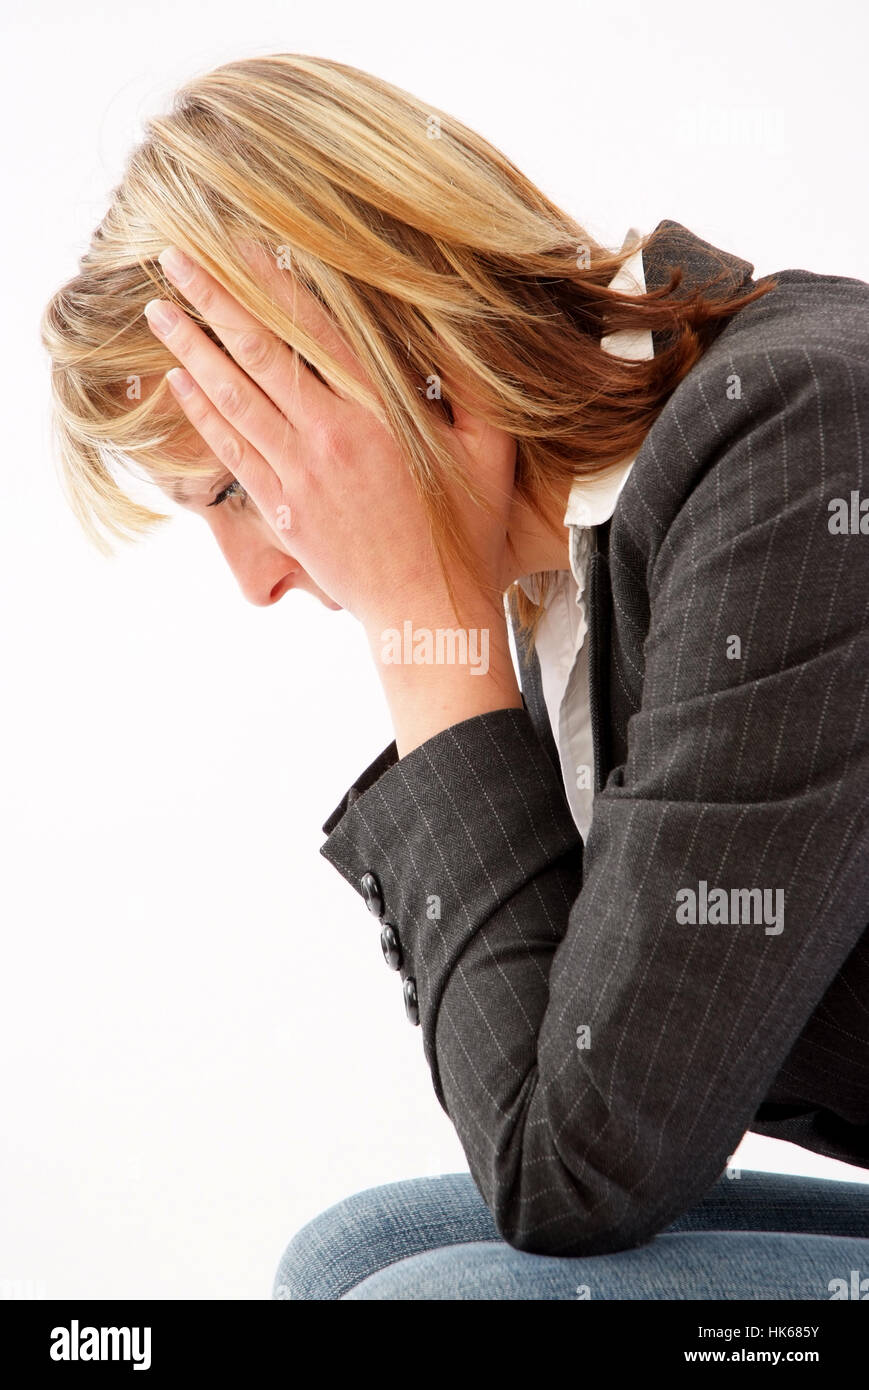 Young woman with depressions Stock Photo